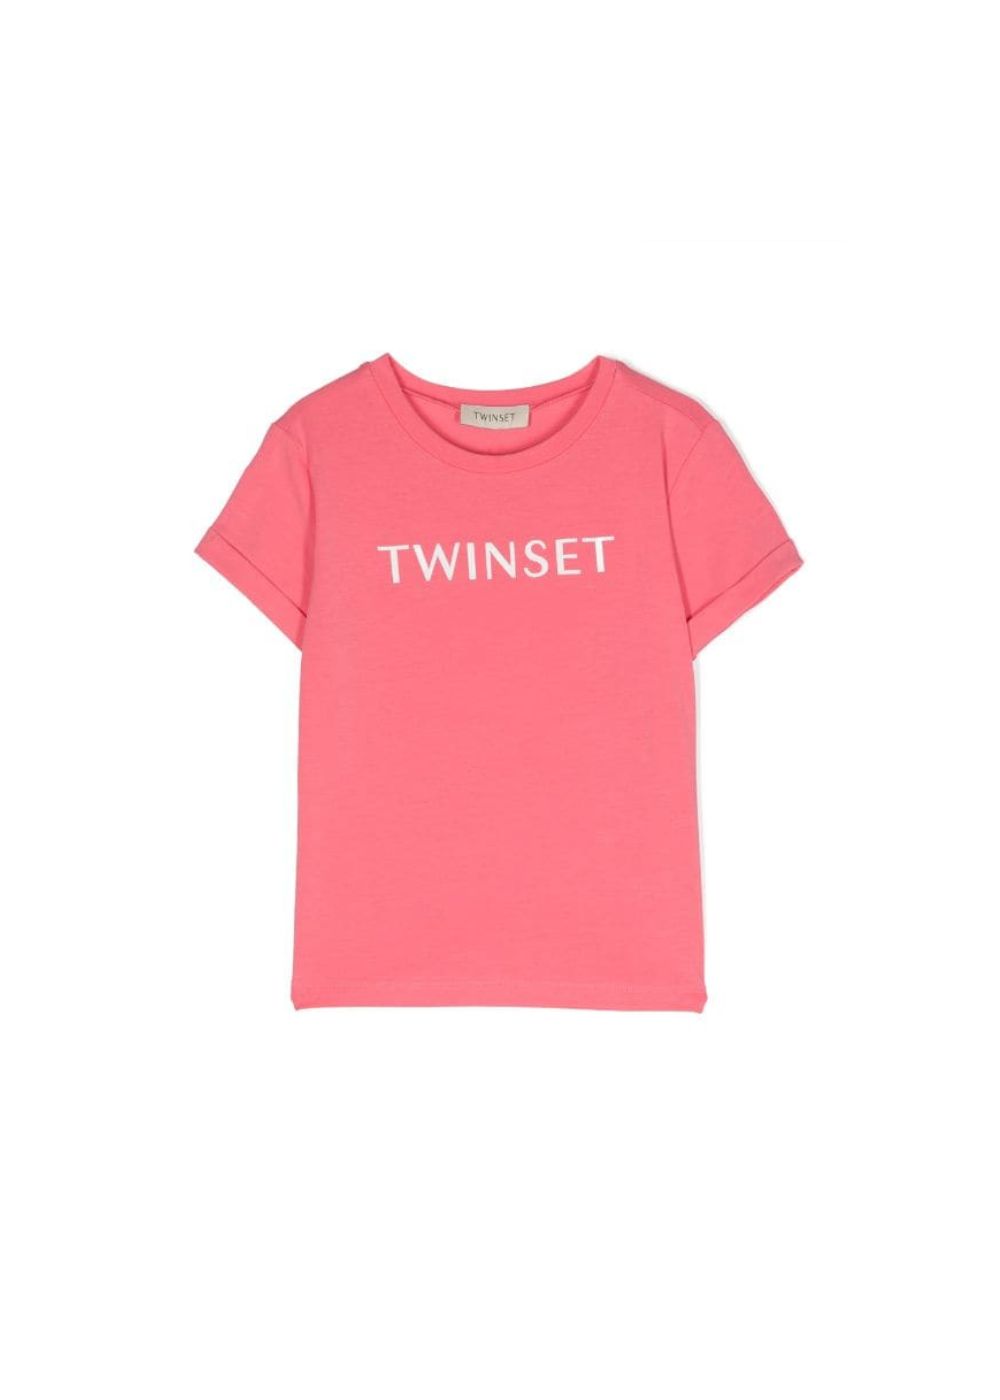 Featured image for “Twinset T-shirt con Stampa”